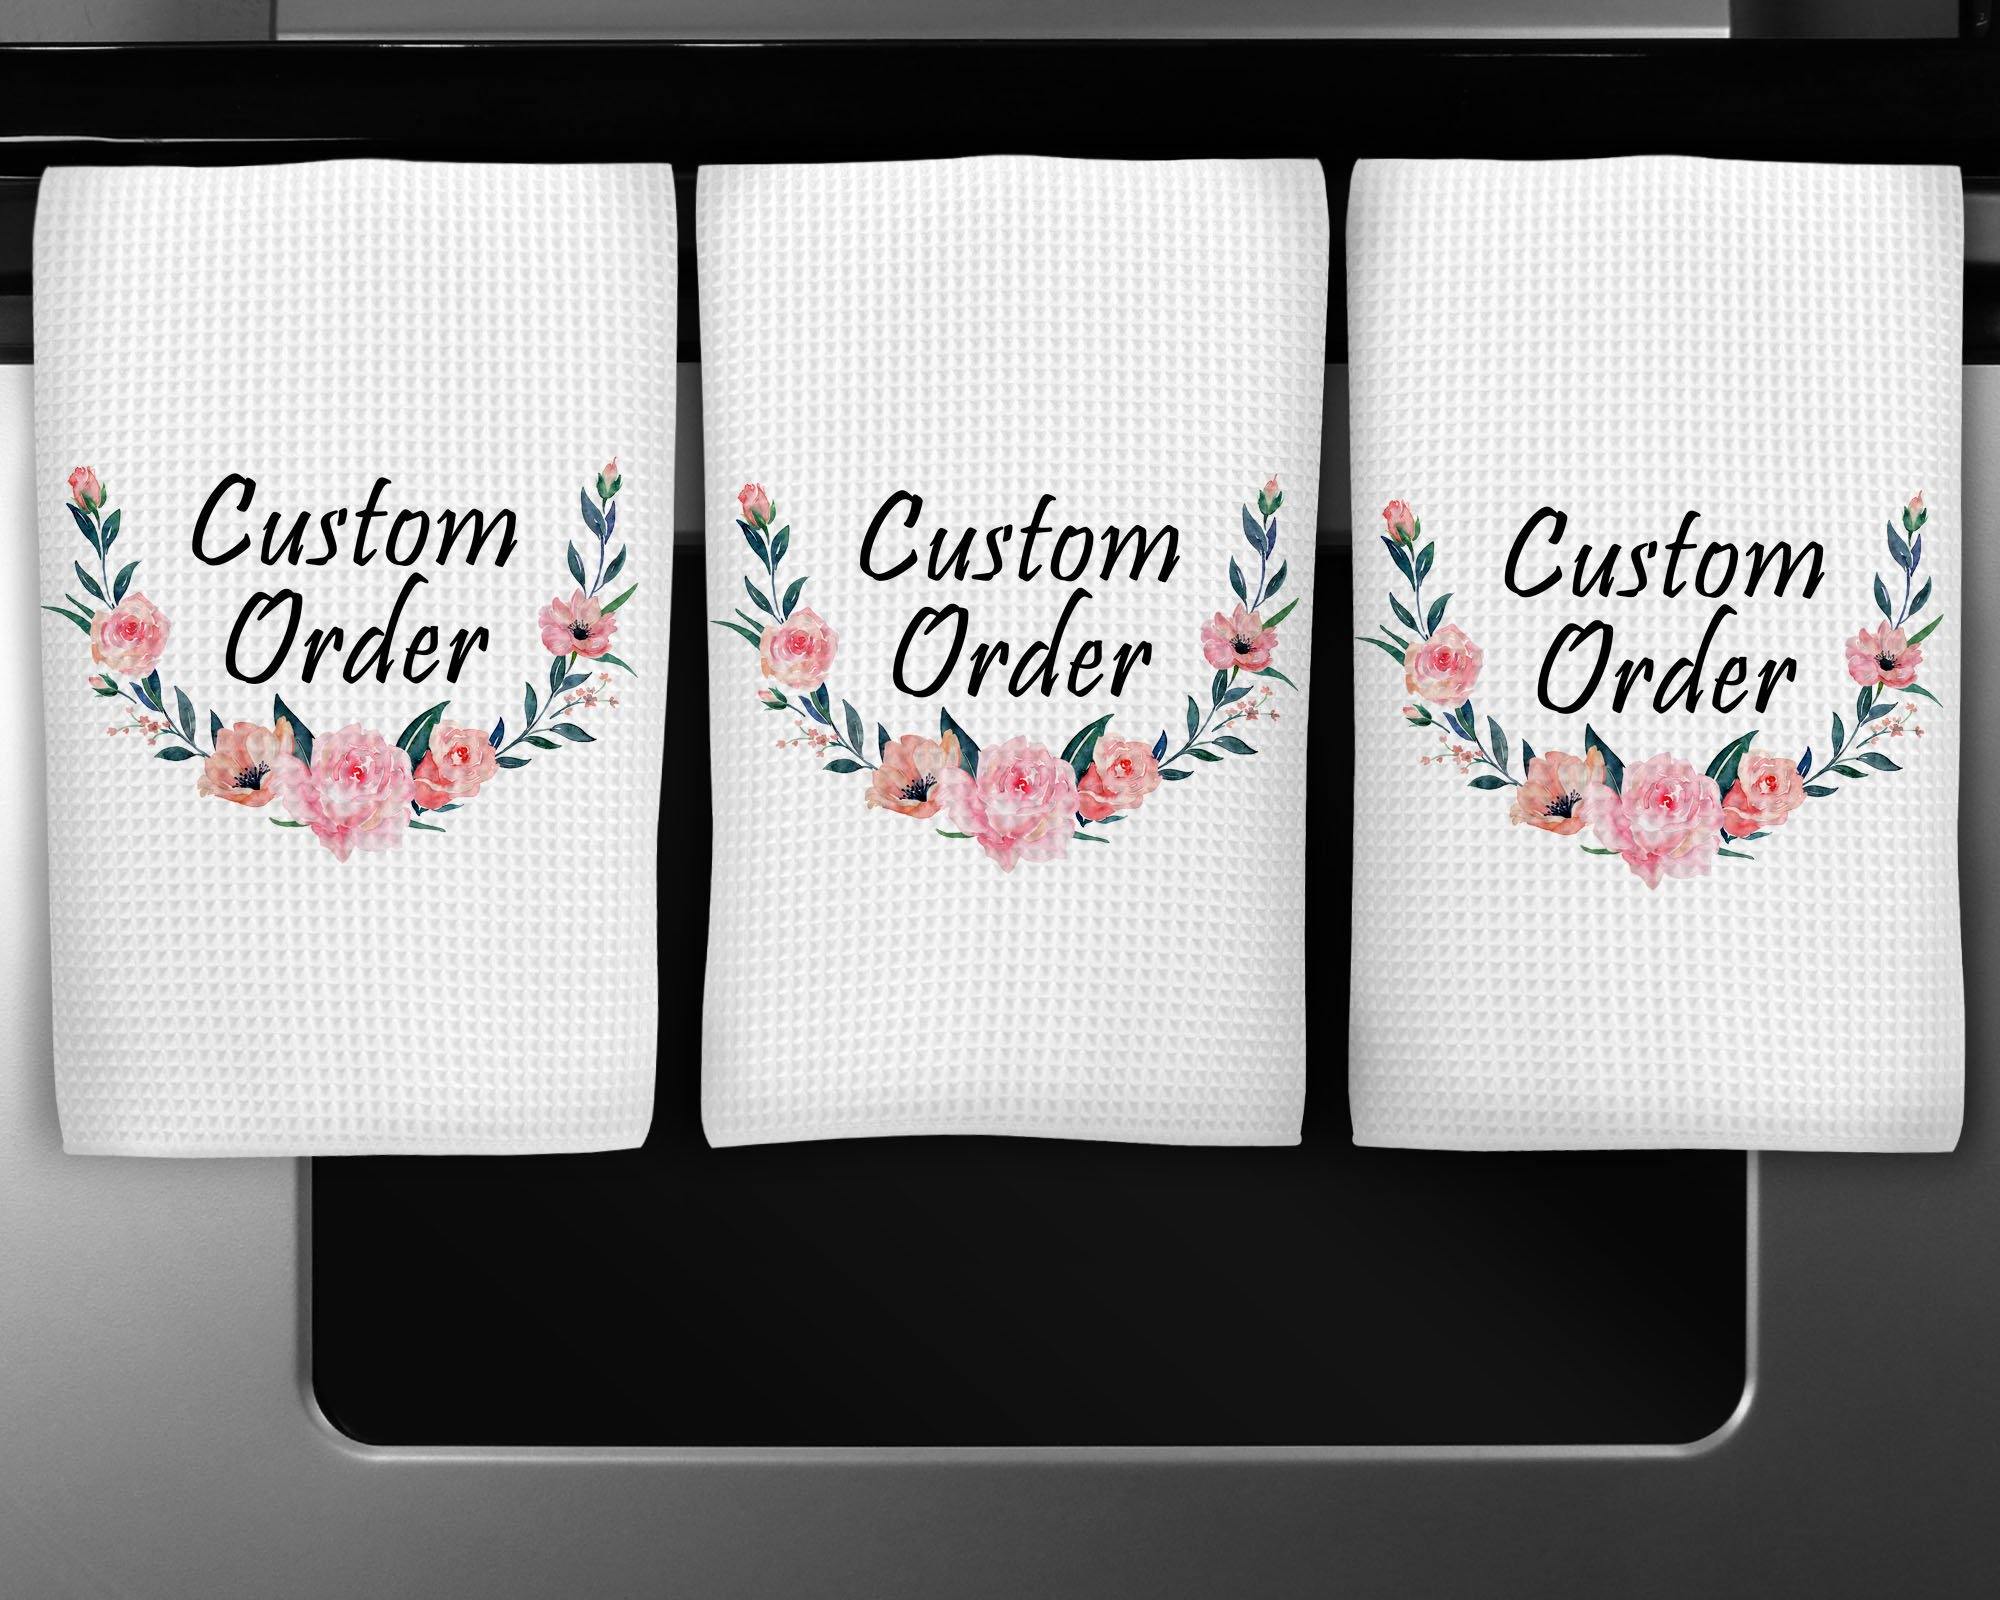 Personalized Hand Towel Waffle Textured | Custom Kitchen Gifts | Custom Order - This & That Solutions - Personalized Hand Towel Waffle Textured | Custom Kitchen Gifts | Custom Order - Personalized Gifts & Custom Home Decor